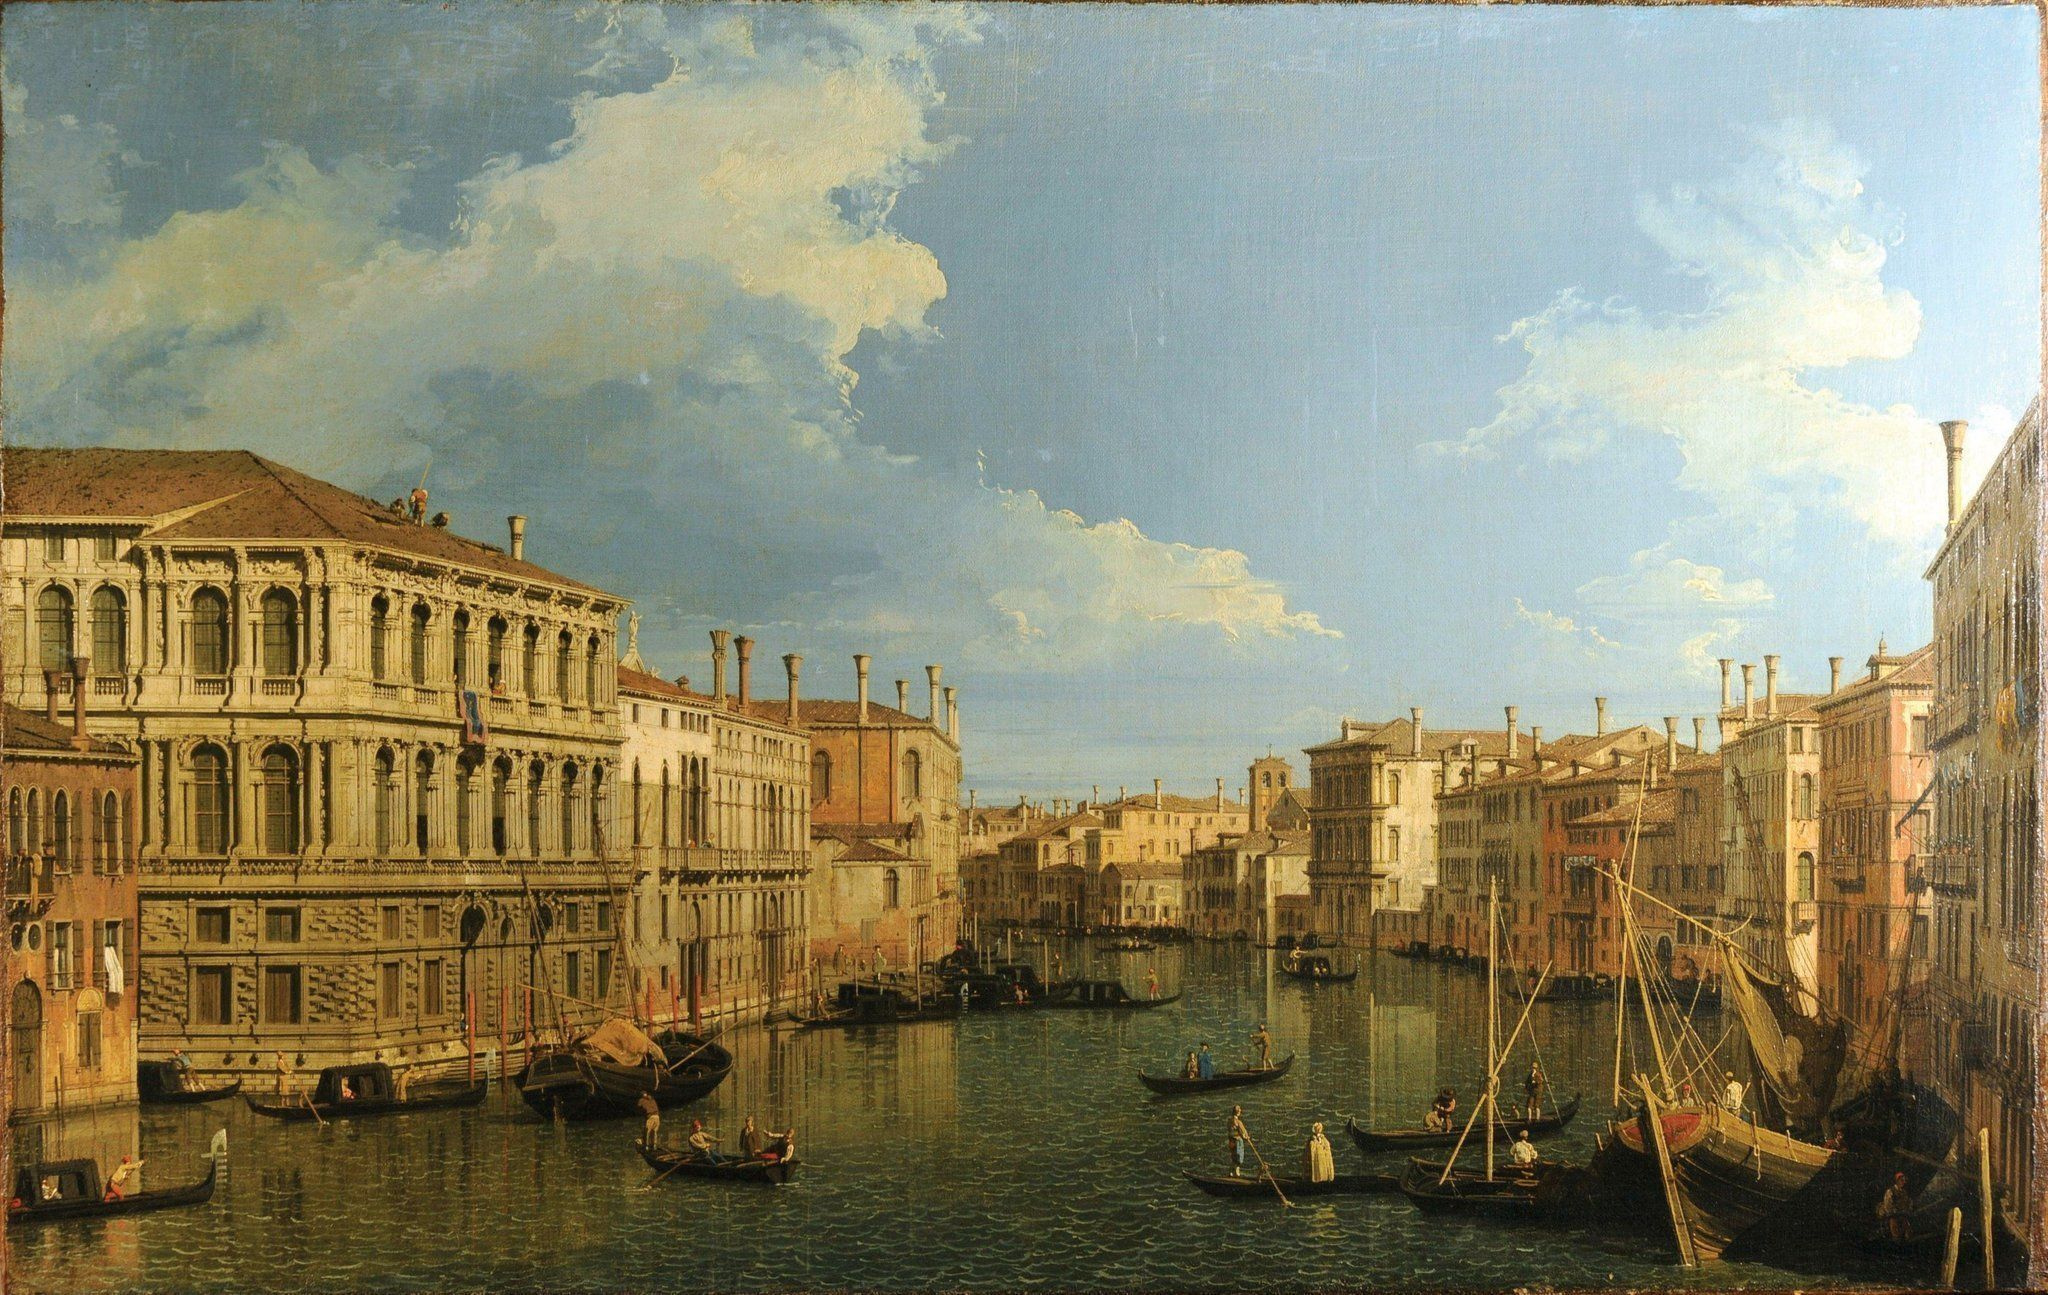 The Grand Canal, Venice by Canaletto, Grasset